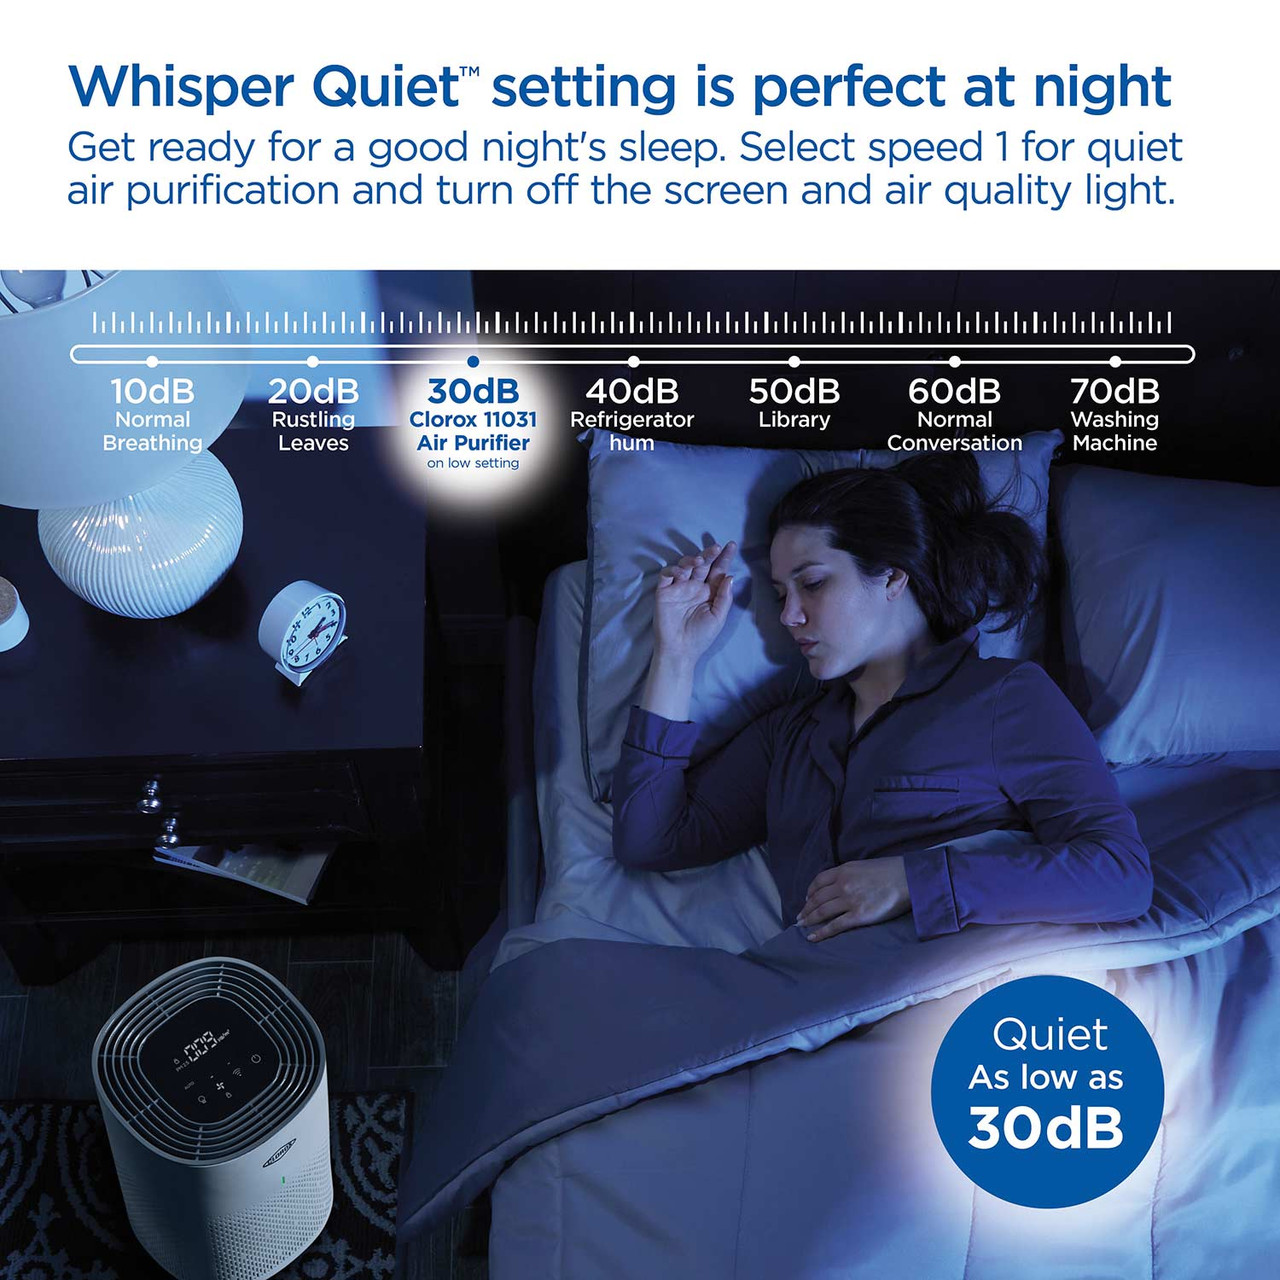 Whisper quiet setting is perfect at night, select speed 1 for quiet air purification and turn off the screen and air quality light